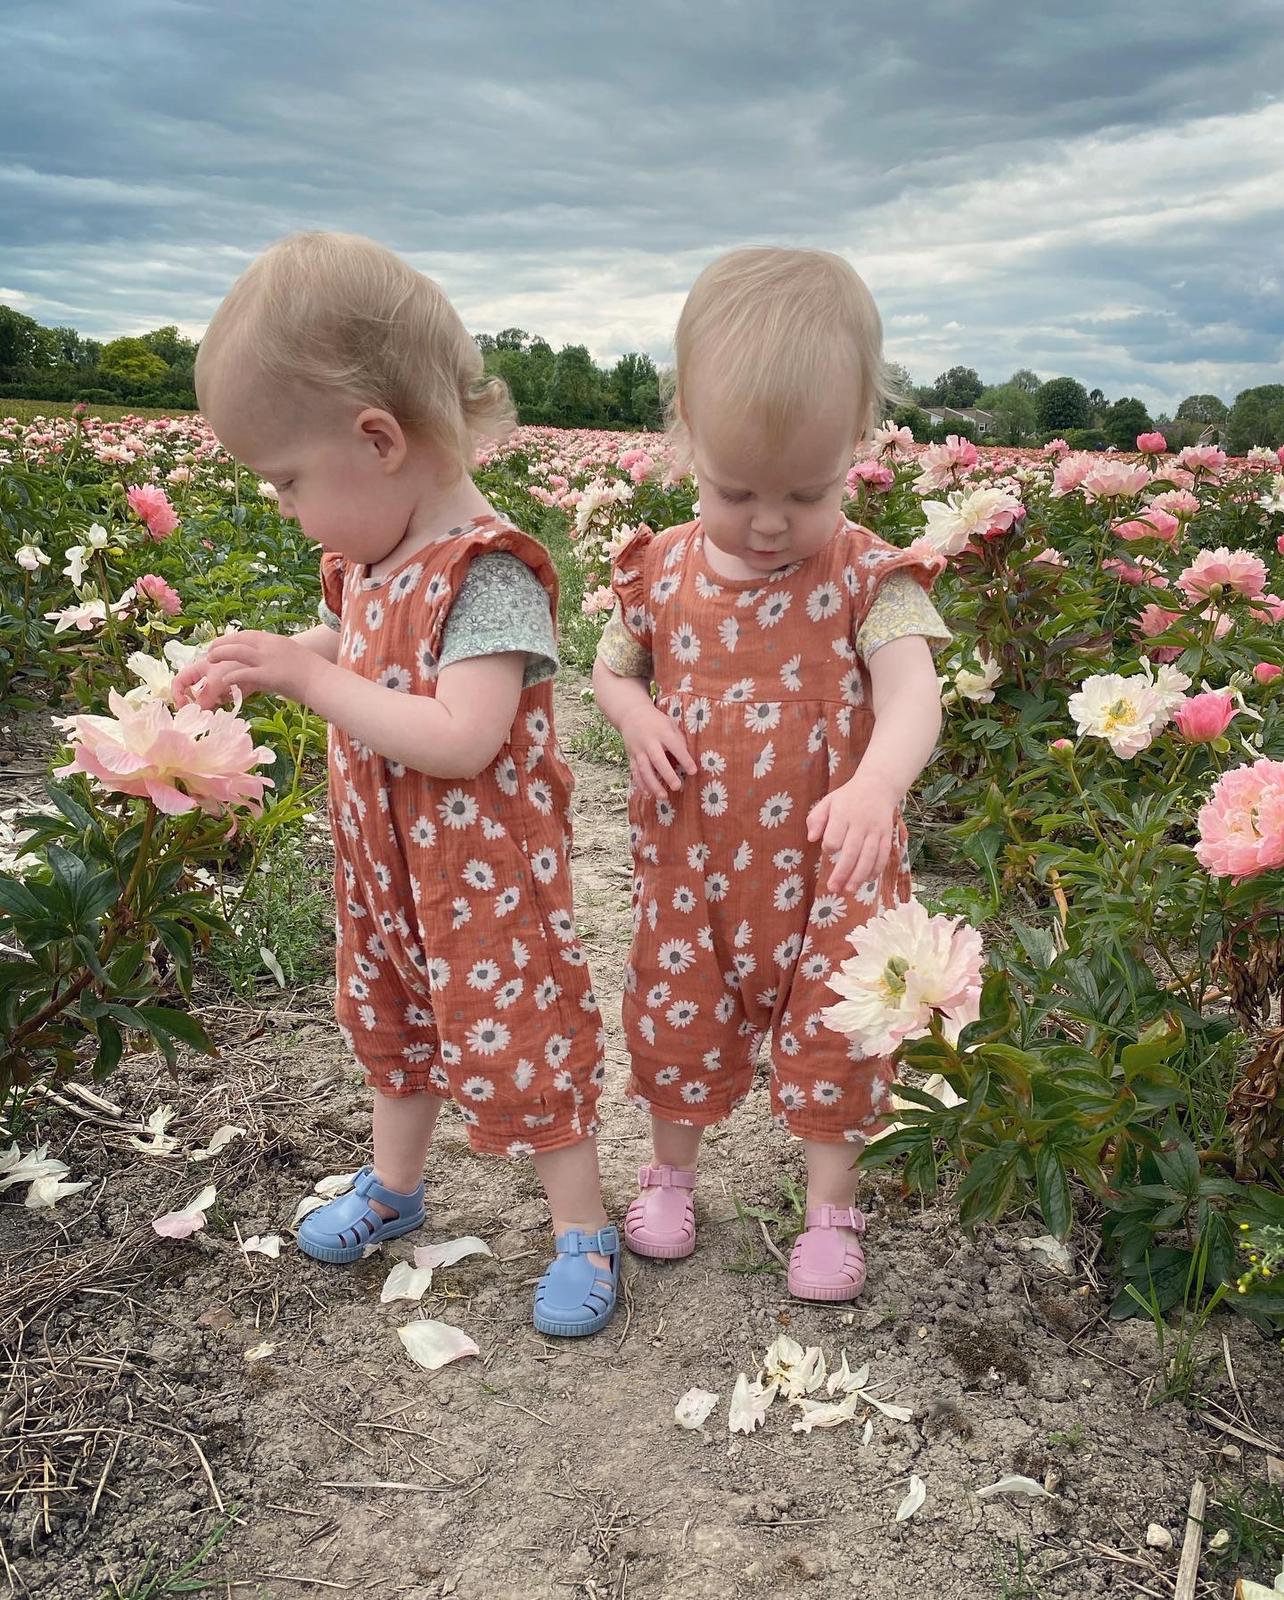 Twin girls wearing matching floral romper suits, standing in a field of flowers